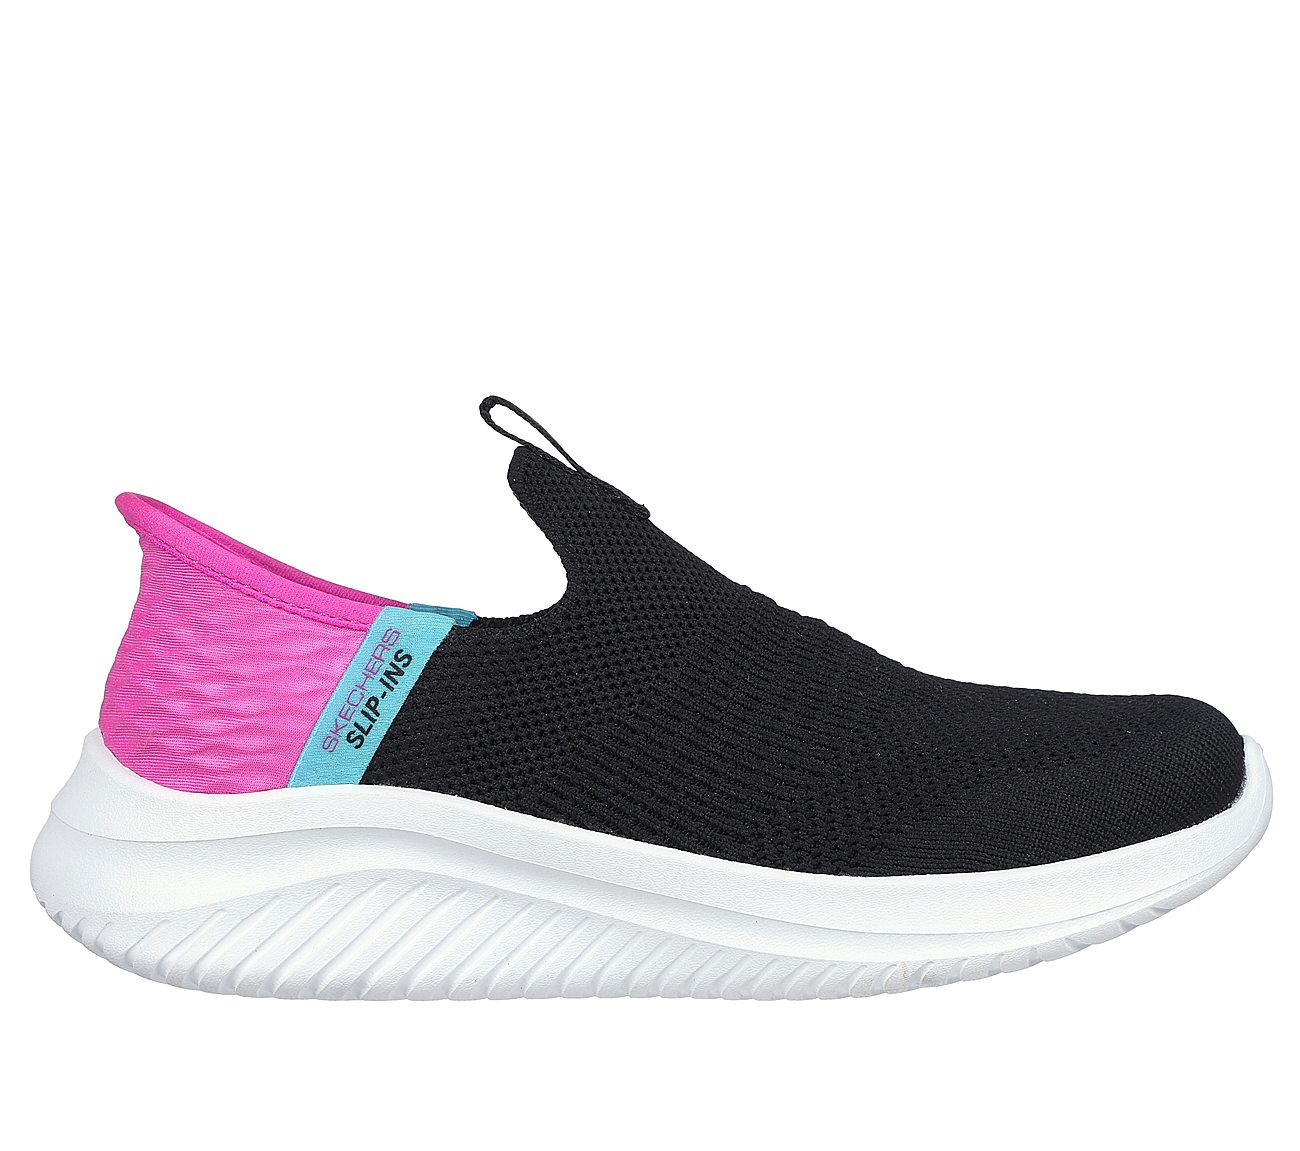 ULTRA FLEX 3.0 - FRESH TIME, BLACK/PINK Footwear Lateral View